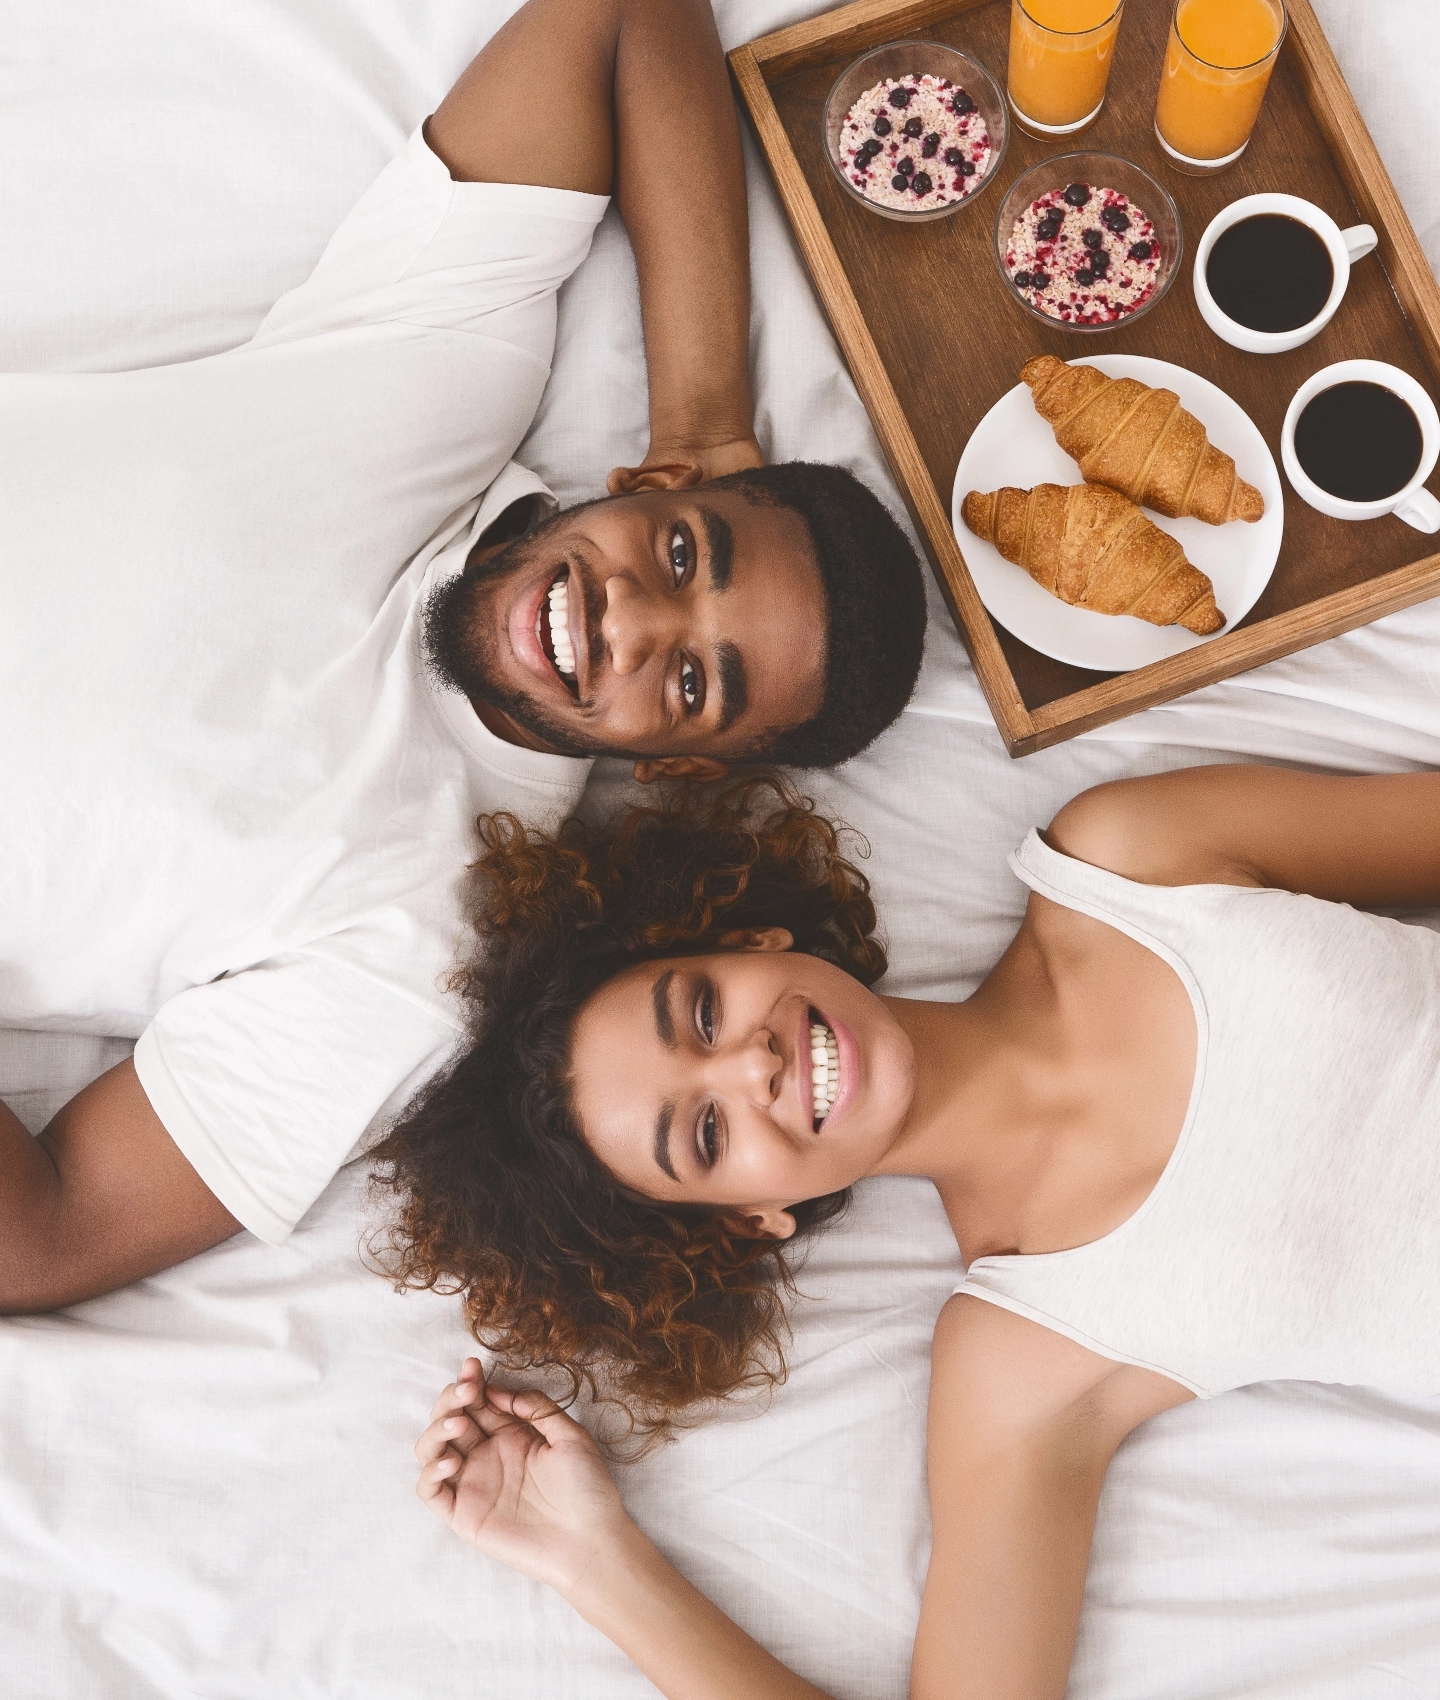 Two people lying in bed with breakfast